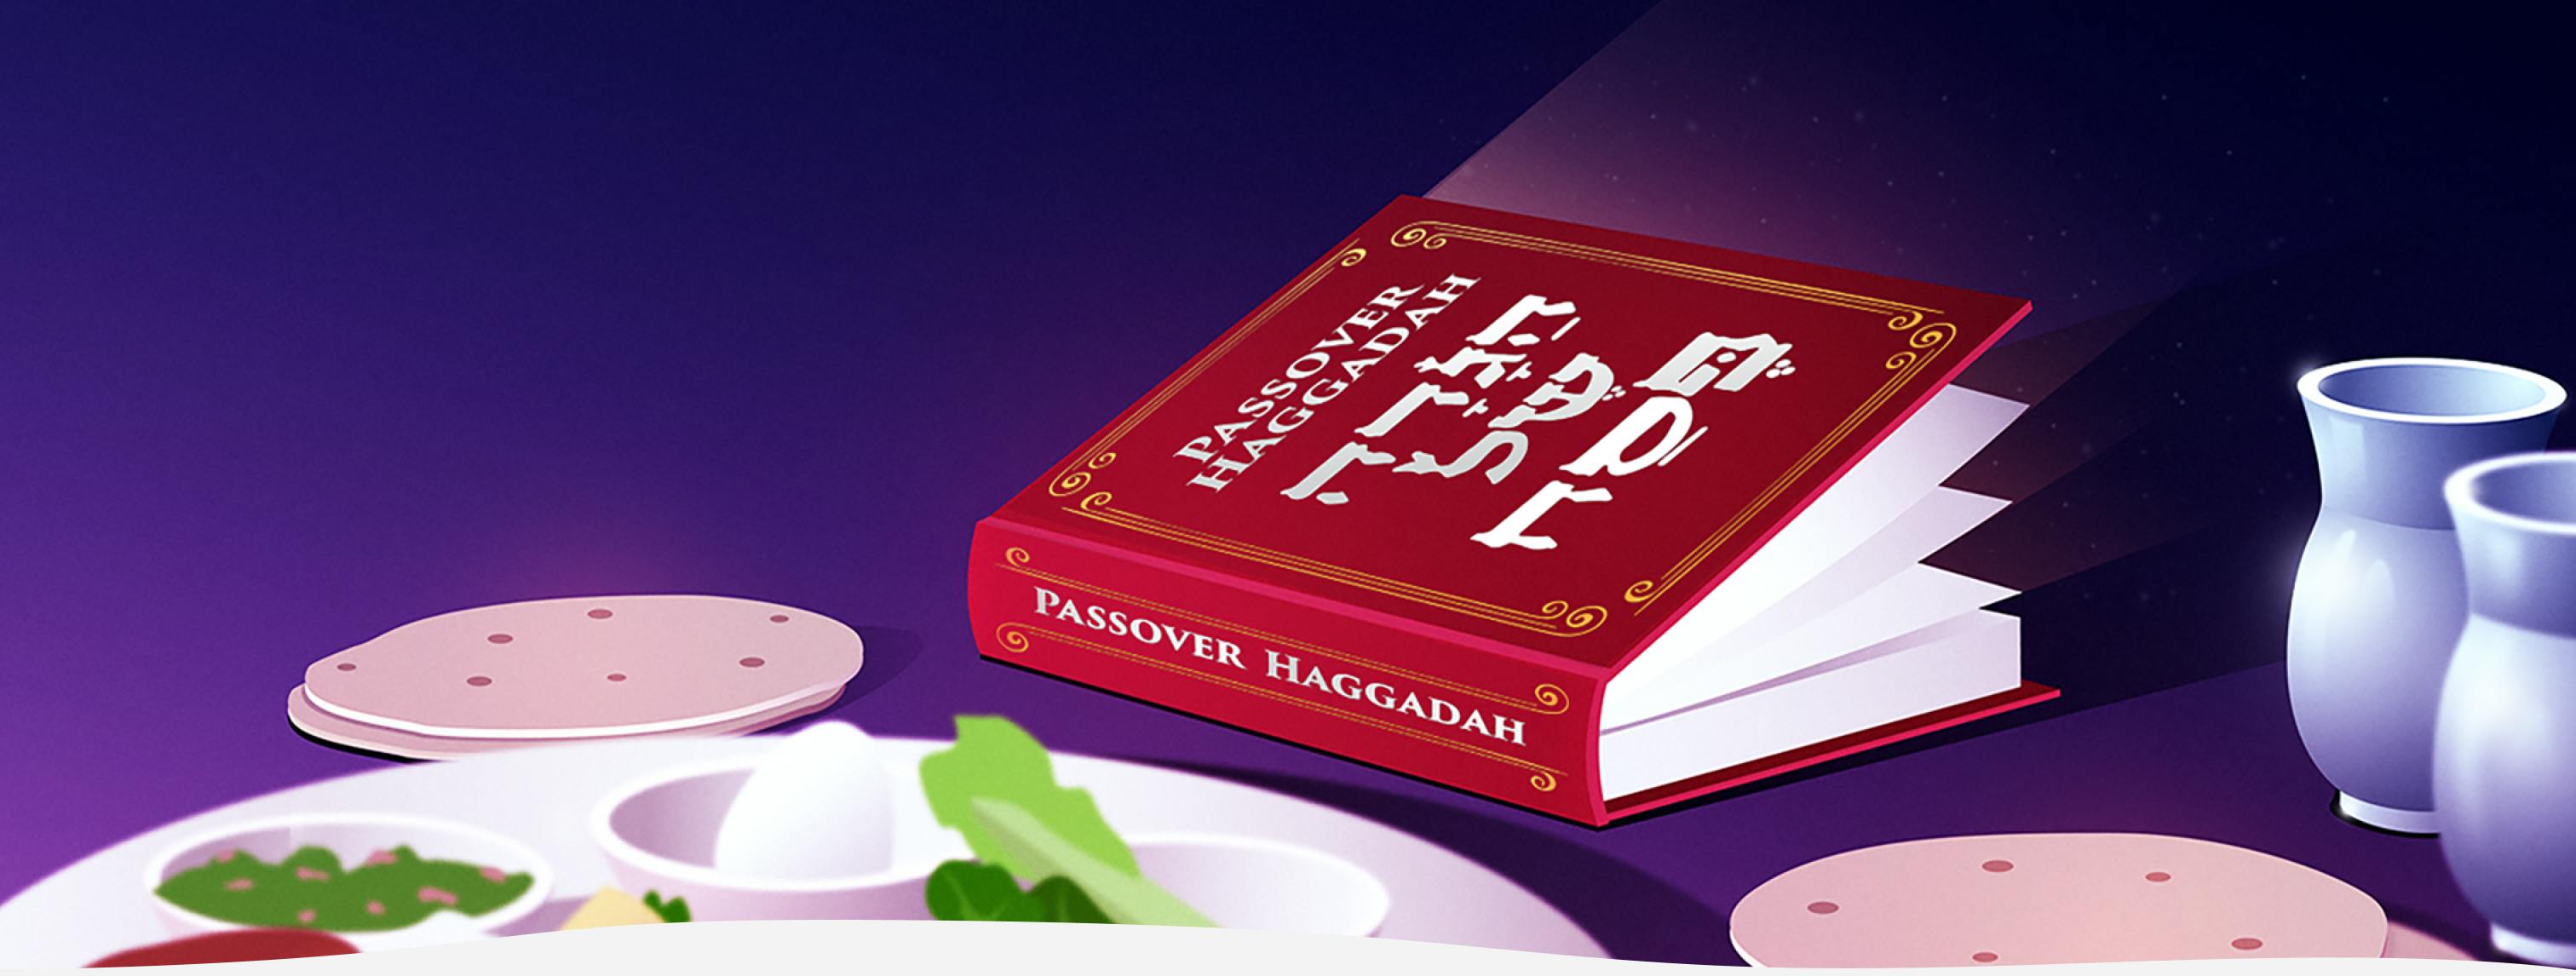 A few of the elements of the Passover seder: the haggadah, cups of wine, matzah, and a seder plate with traditional Passover foods. 